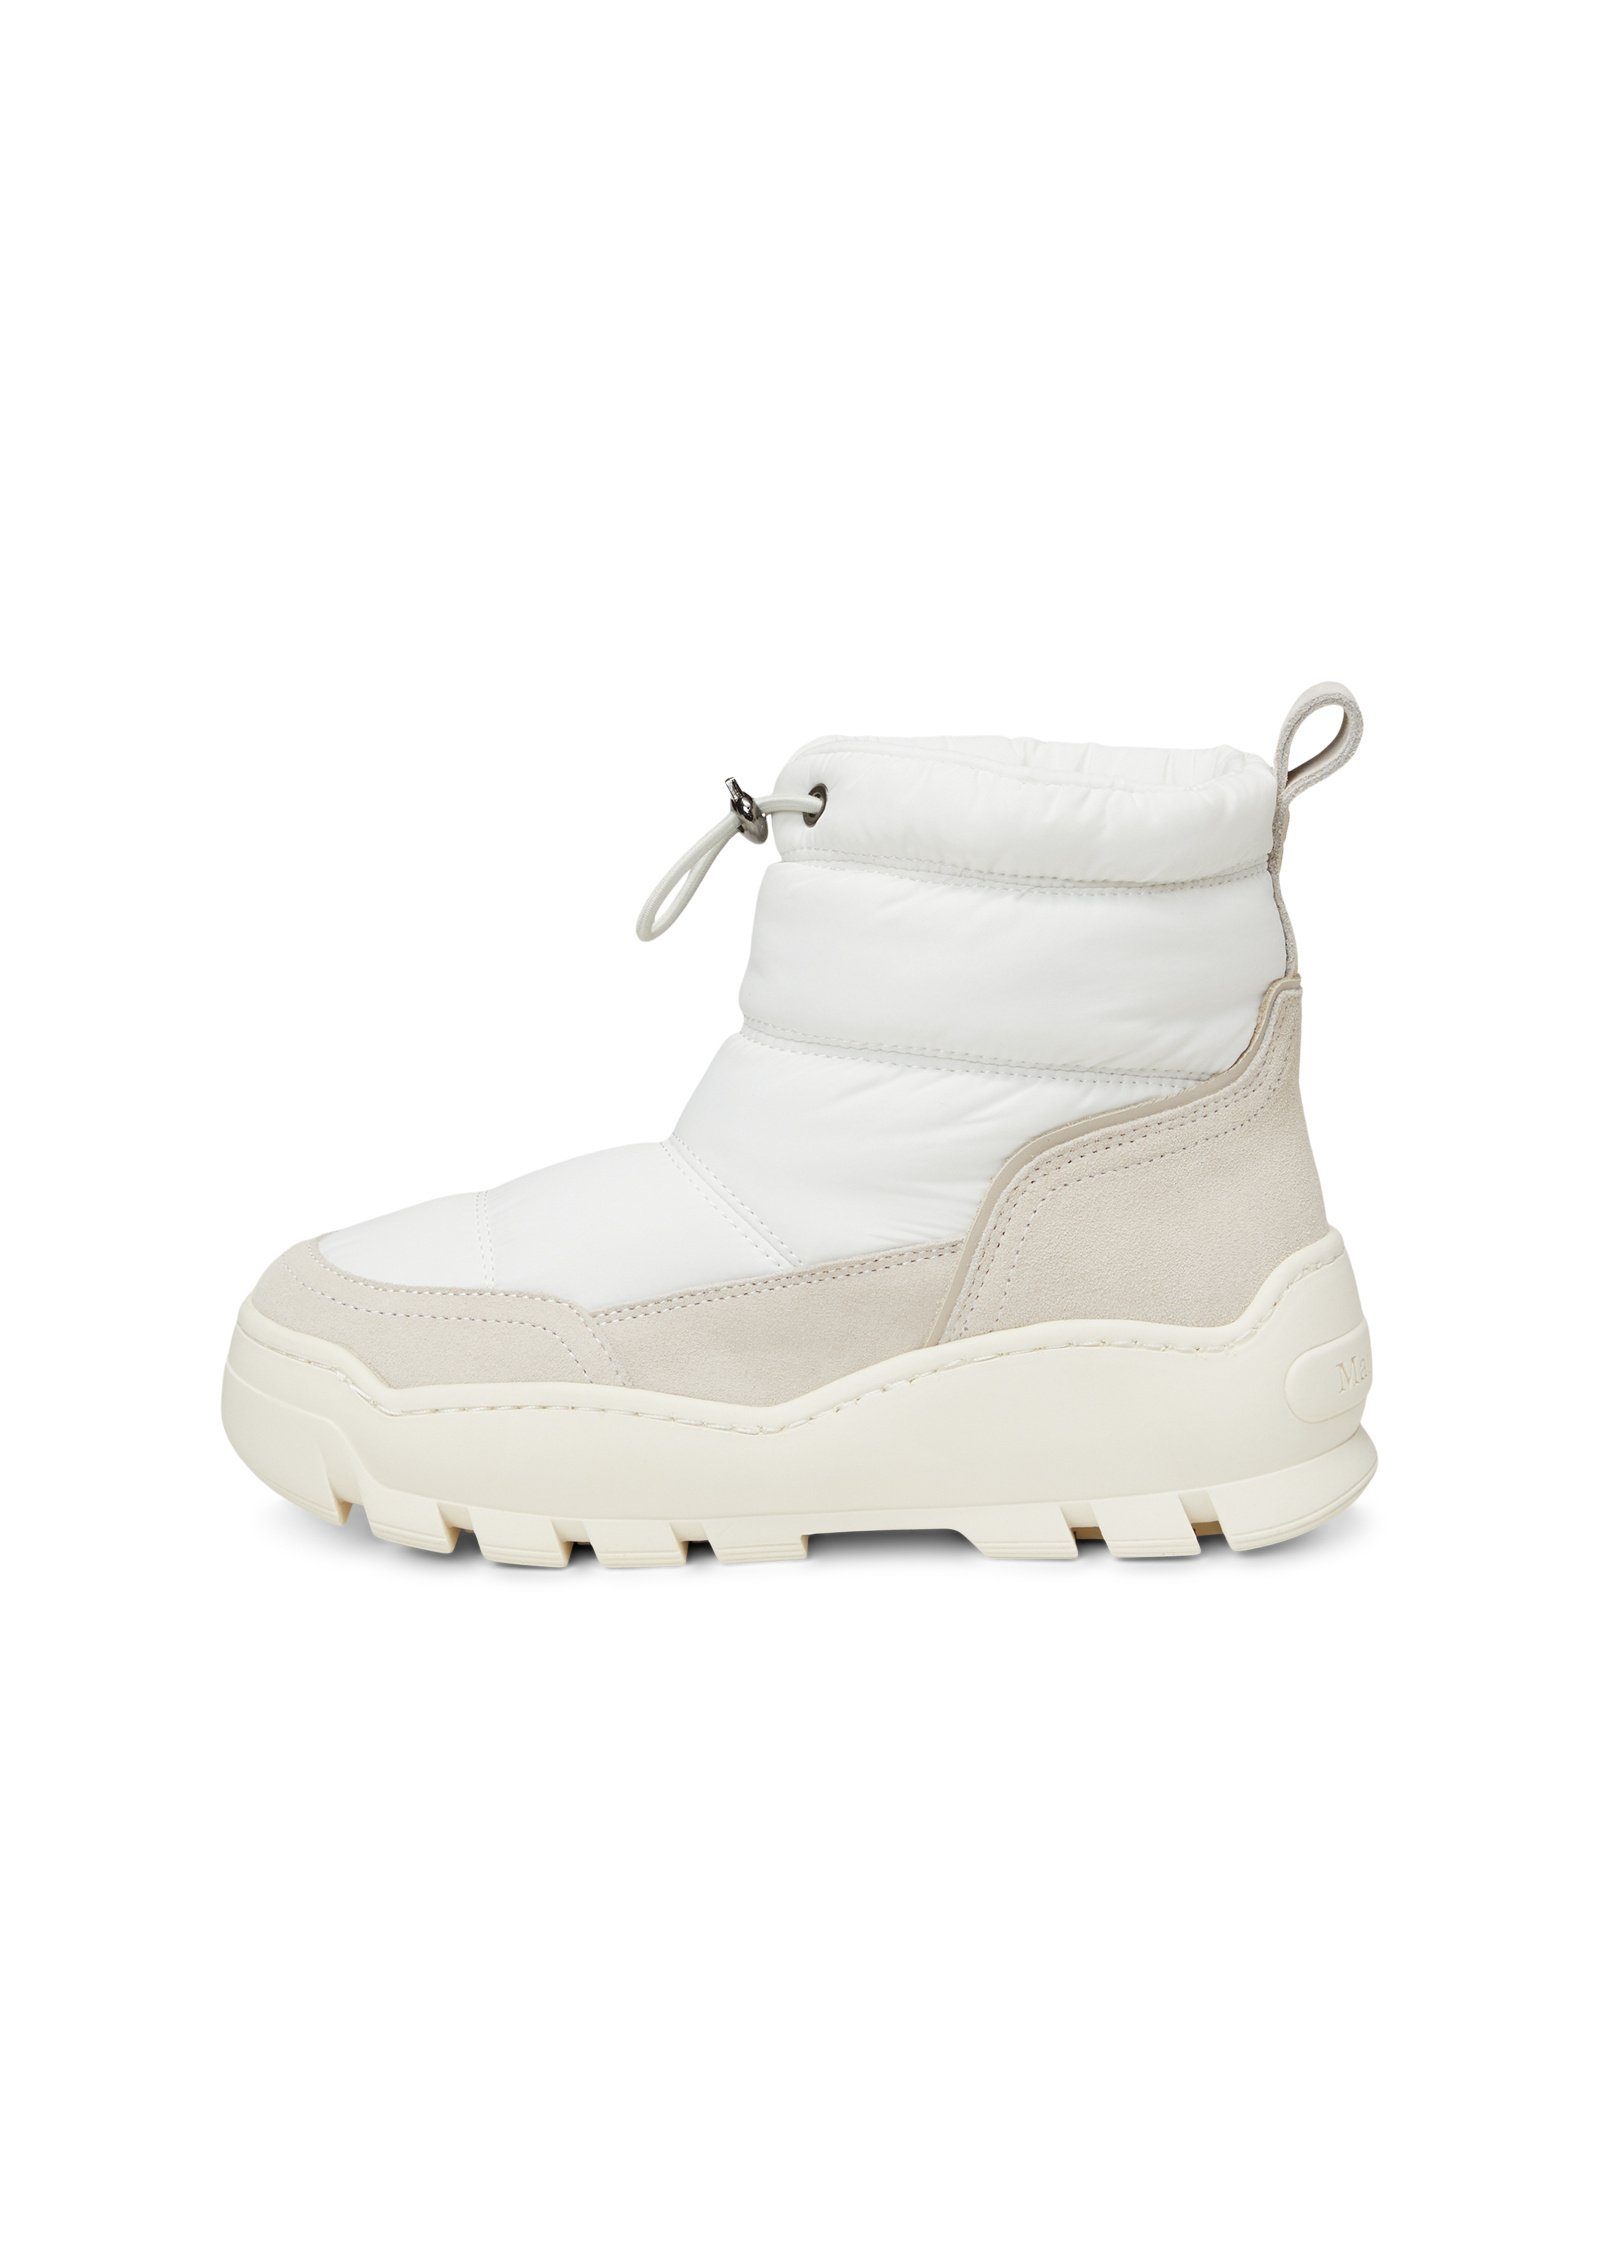 weiß Polyester aus Marc O'Polo recyceltem Winterboots